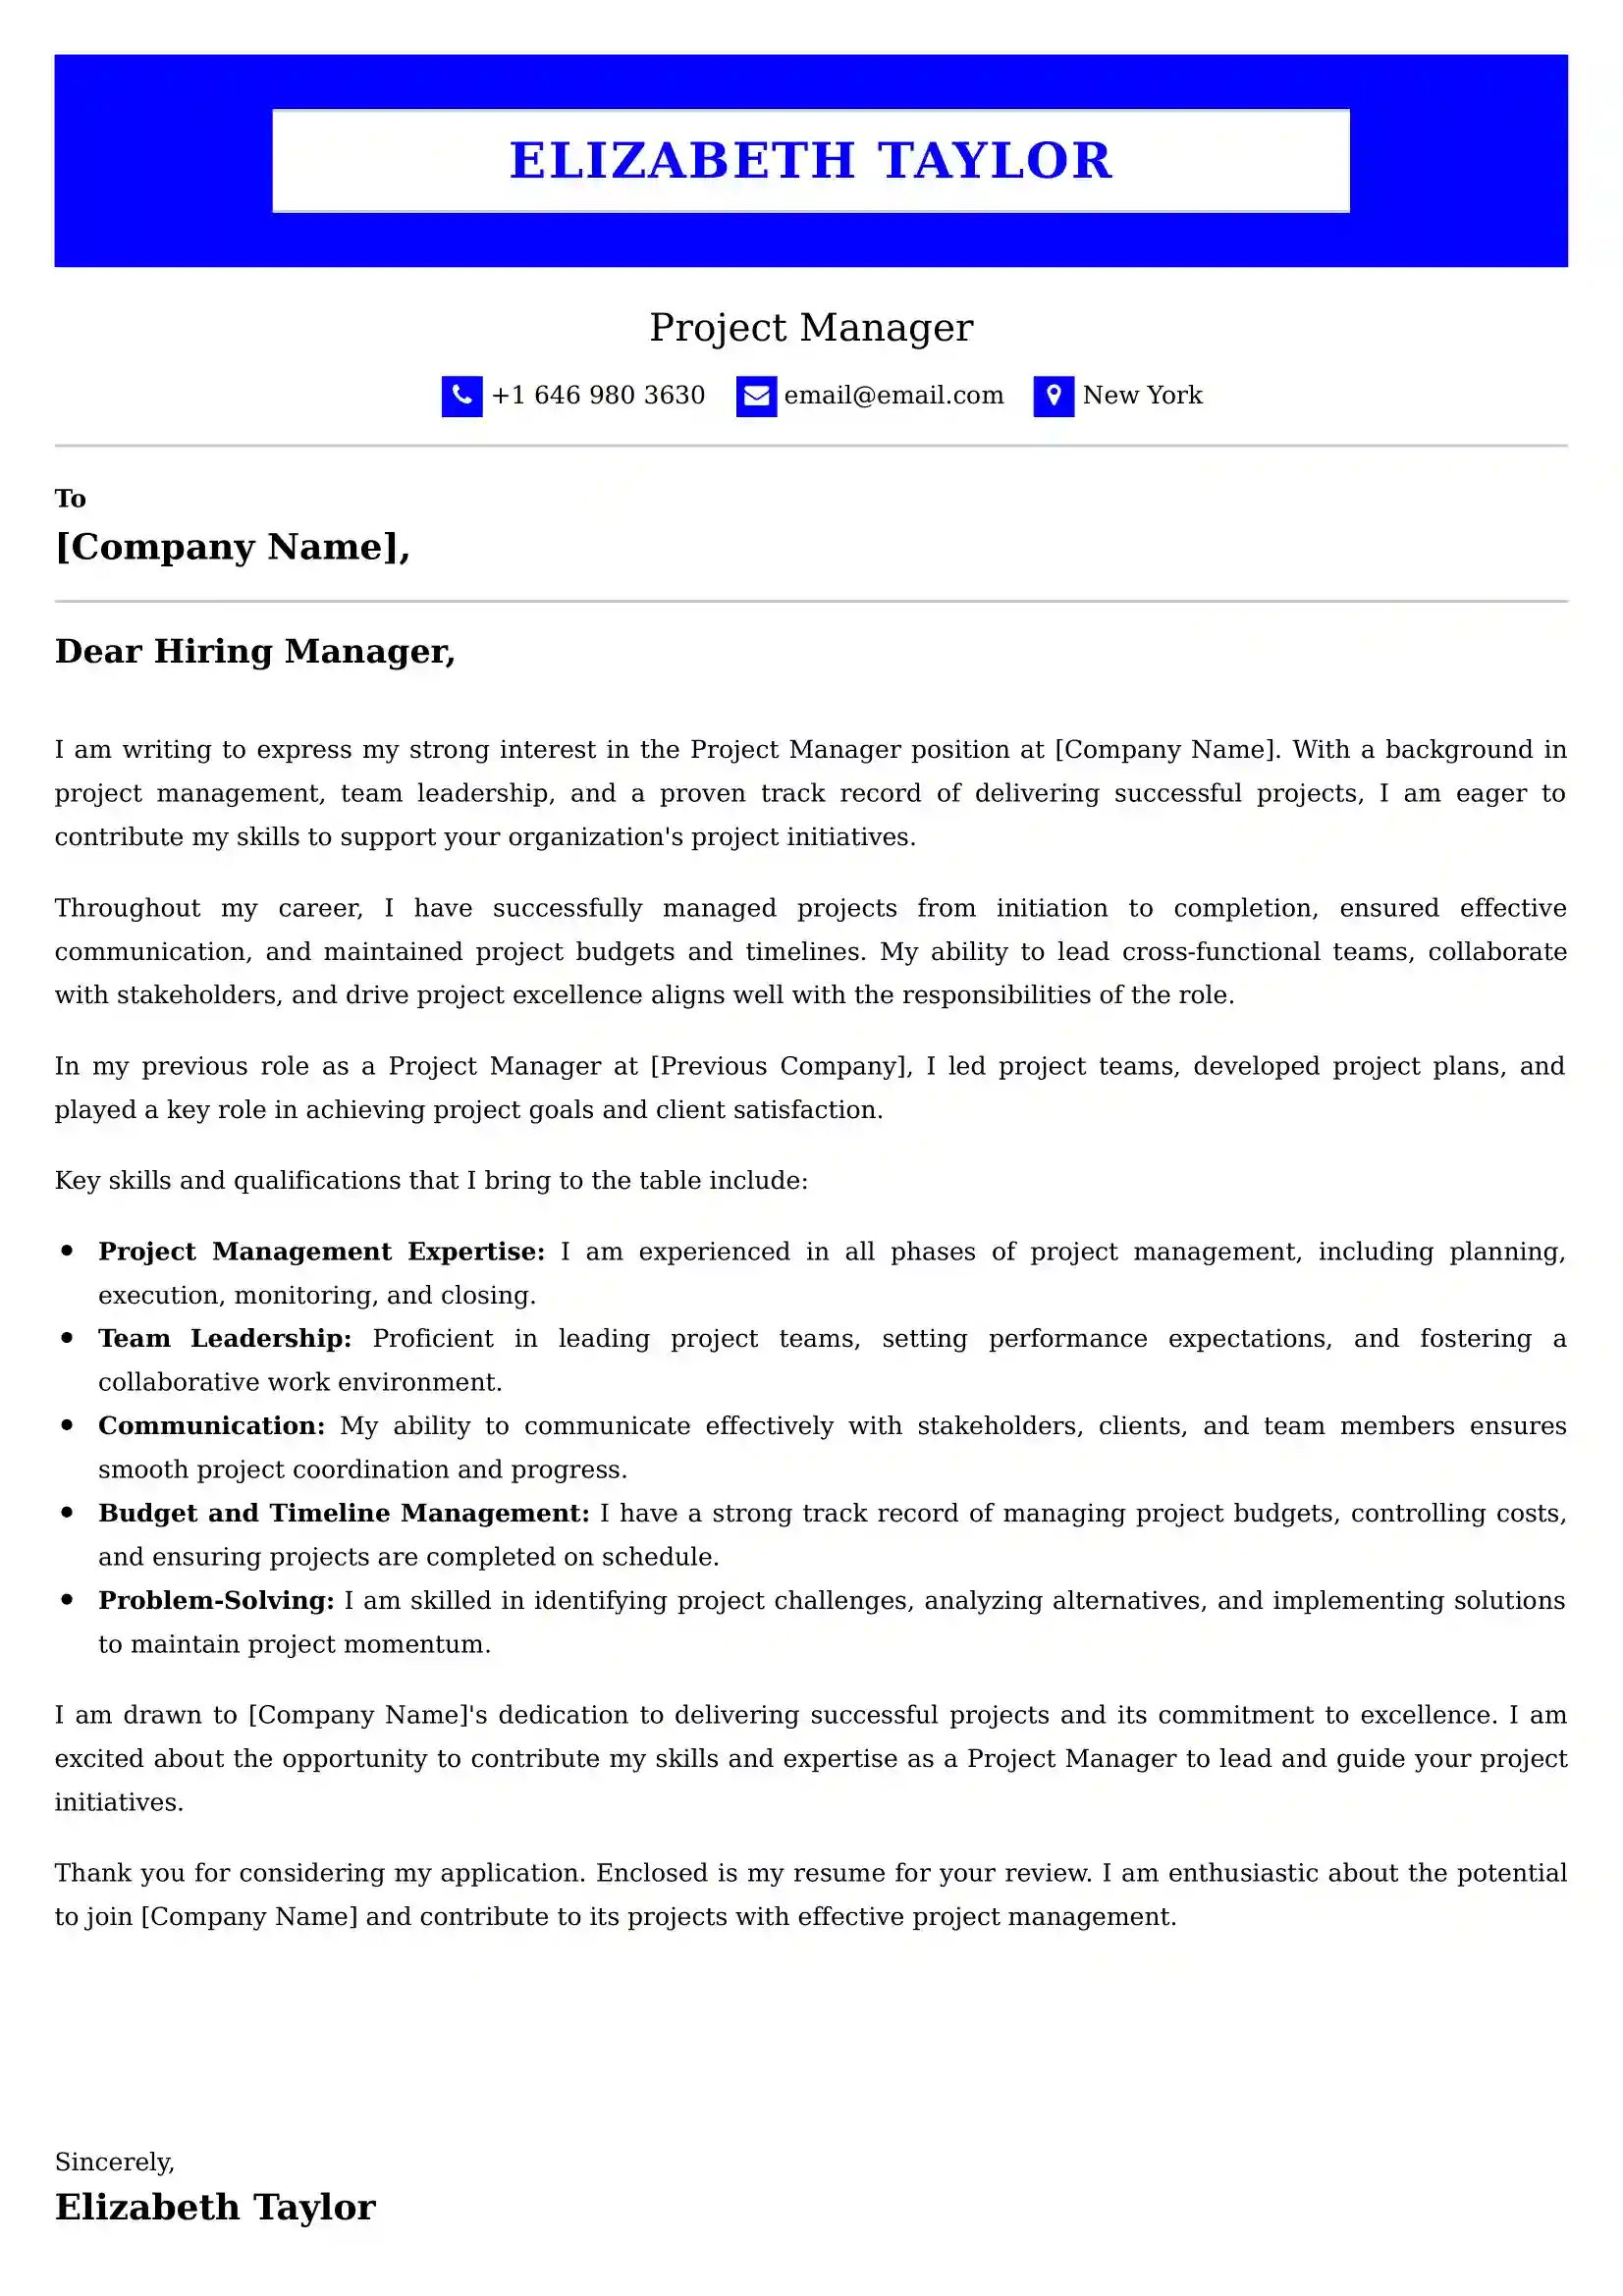 Project Manager Cover Letter Examples for UK 